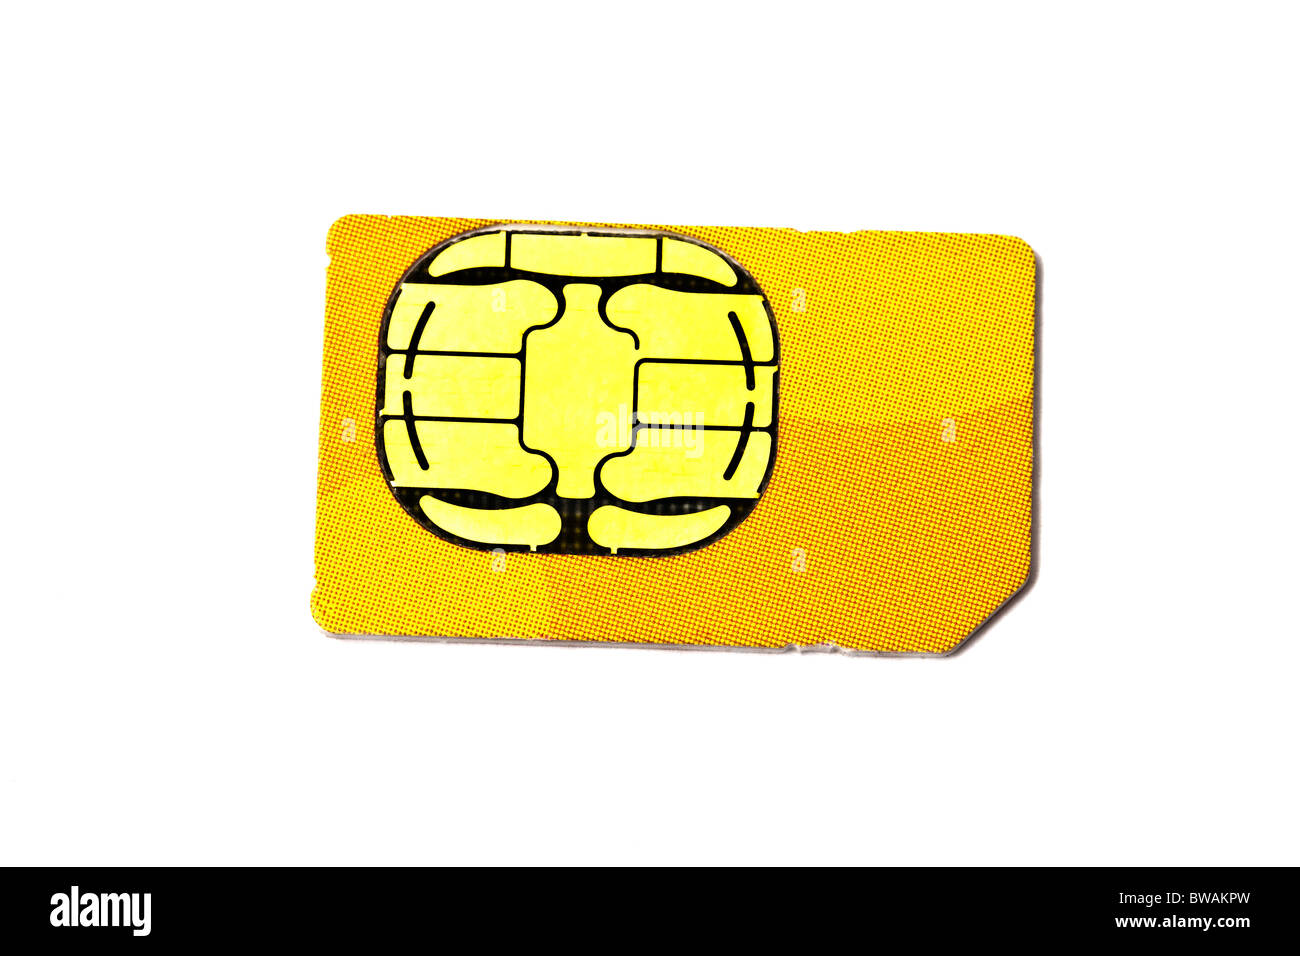 Sim card for mobile phone isolated on white background Stock Photo